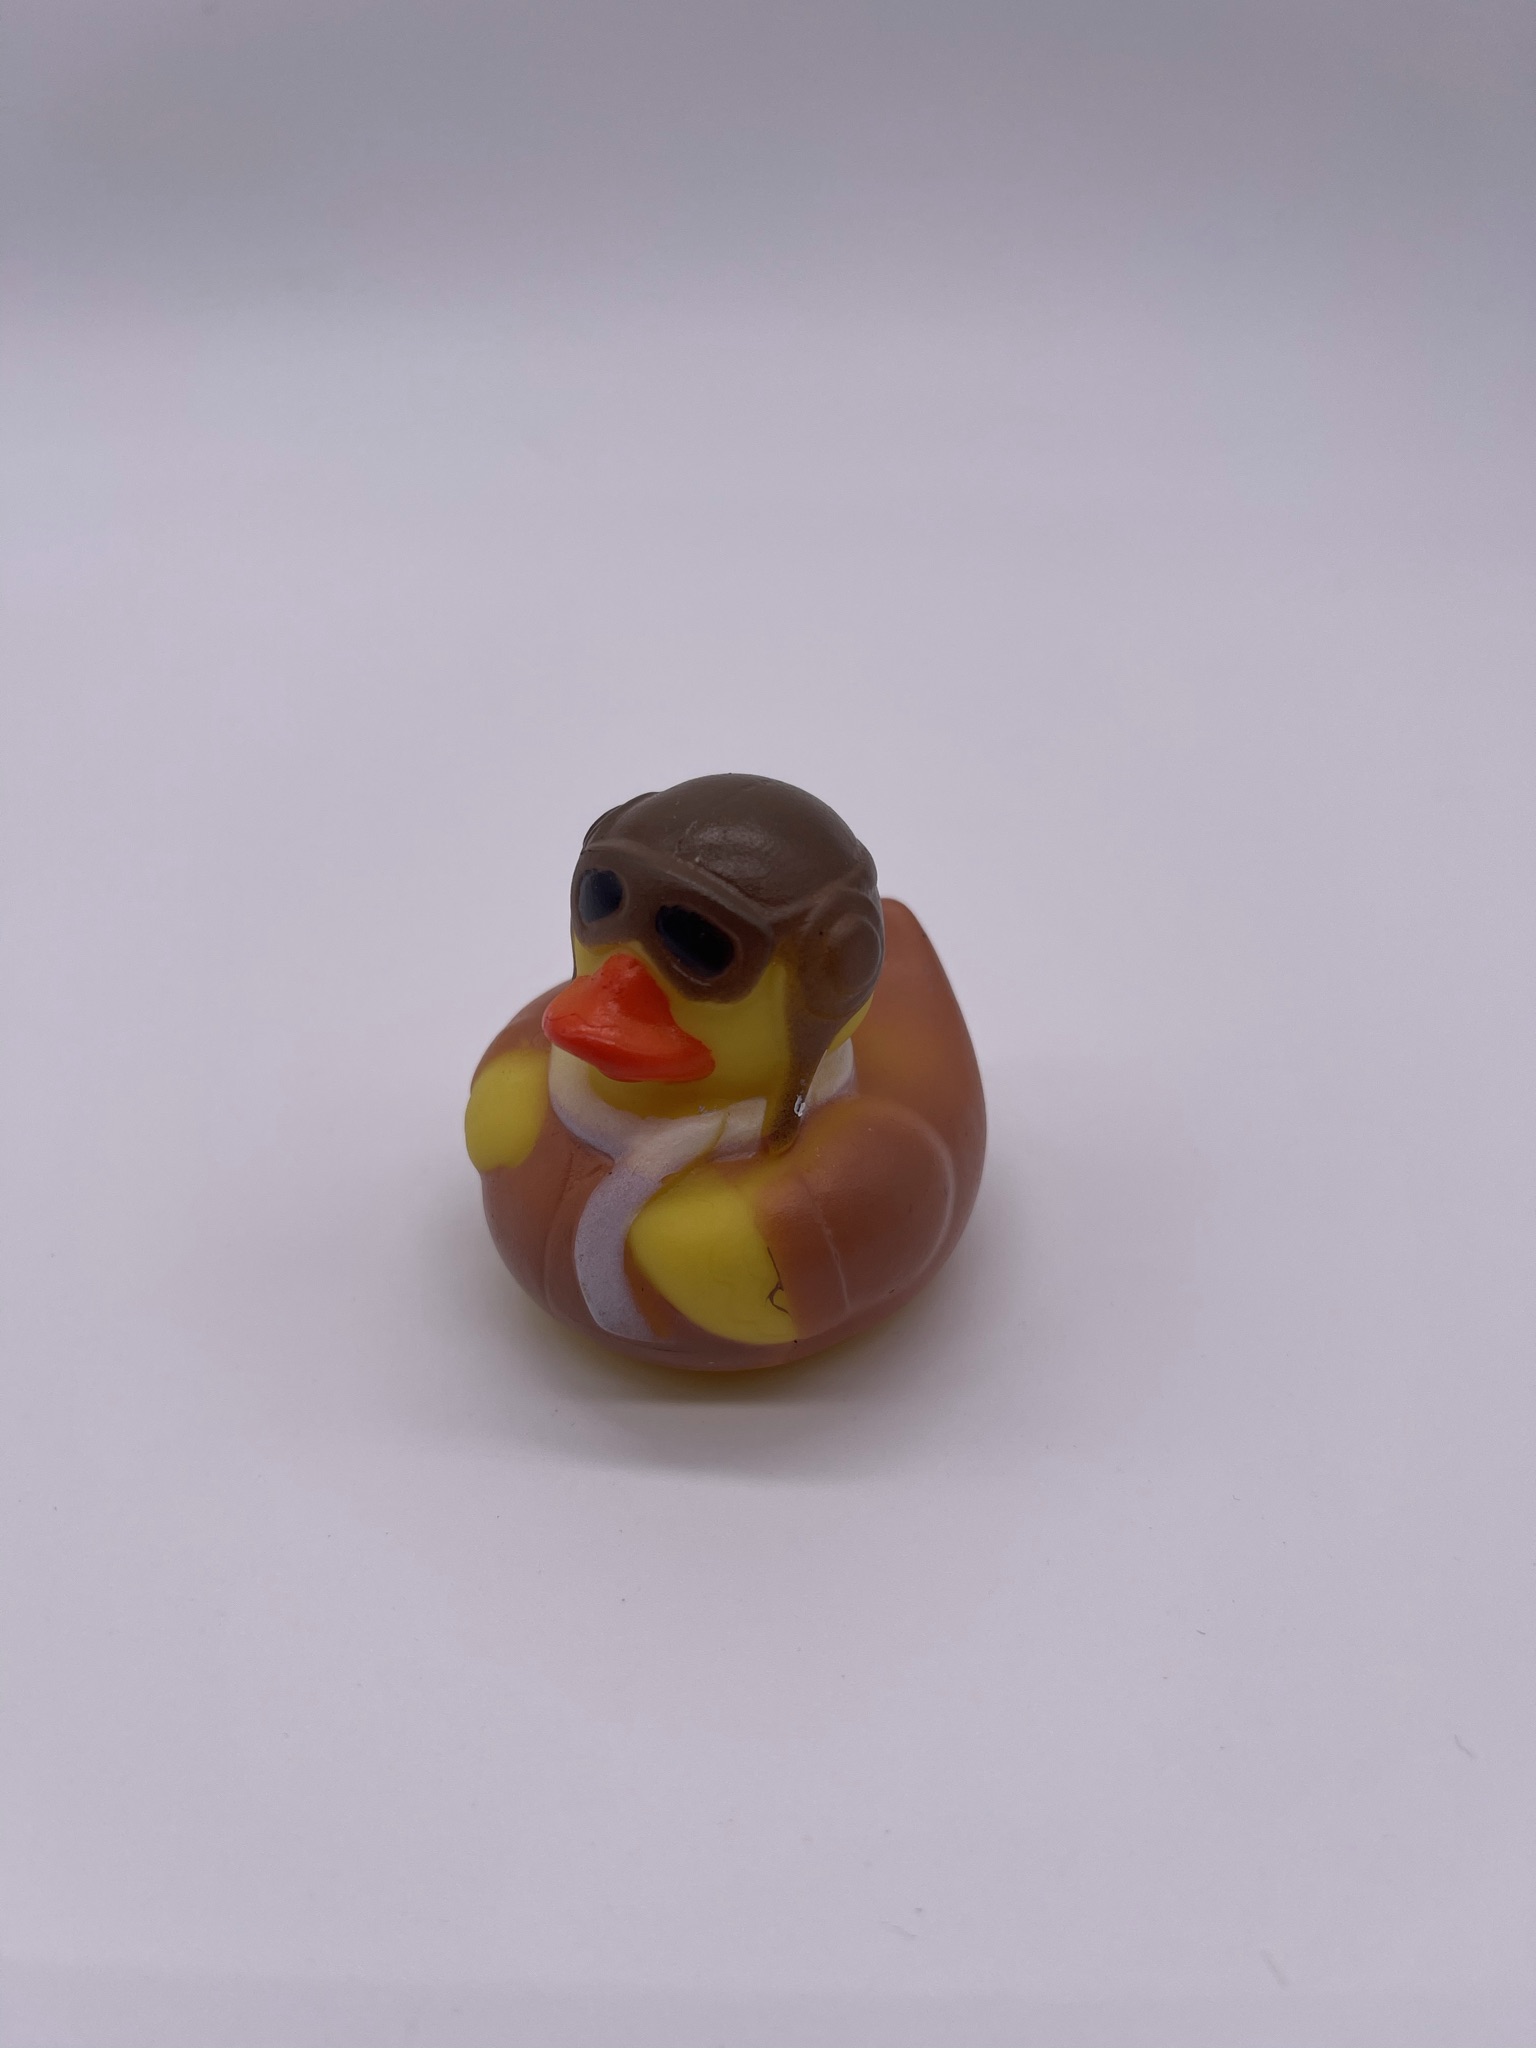 Featured image for “Rubber Duck”